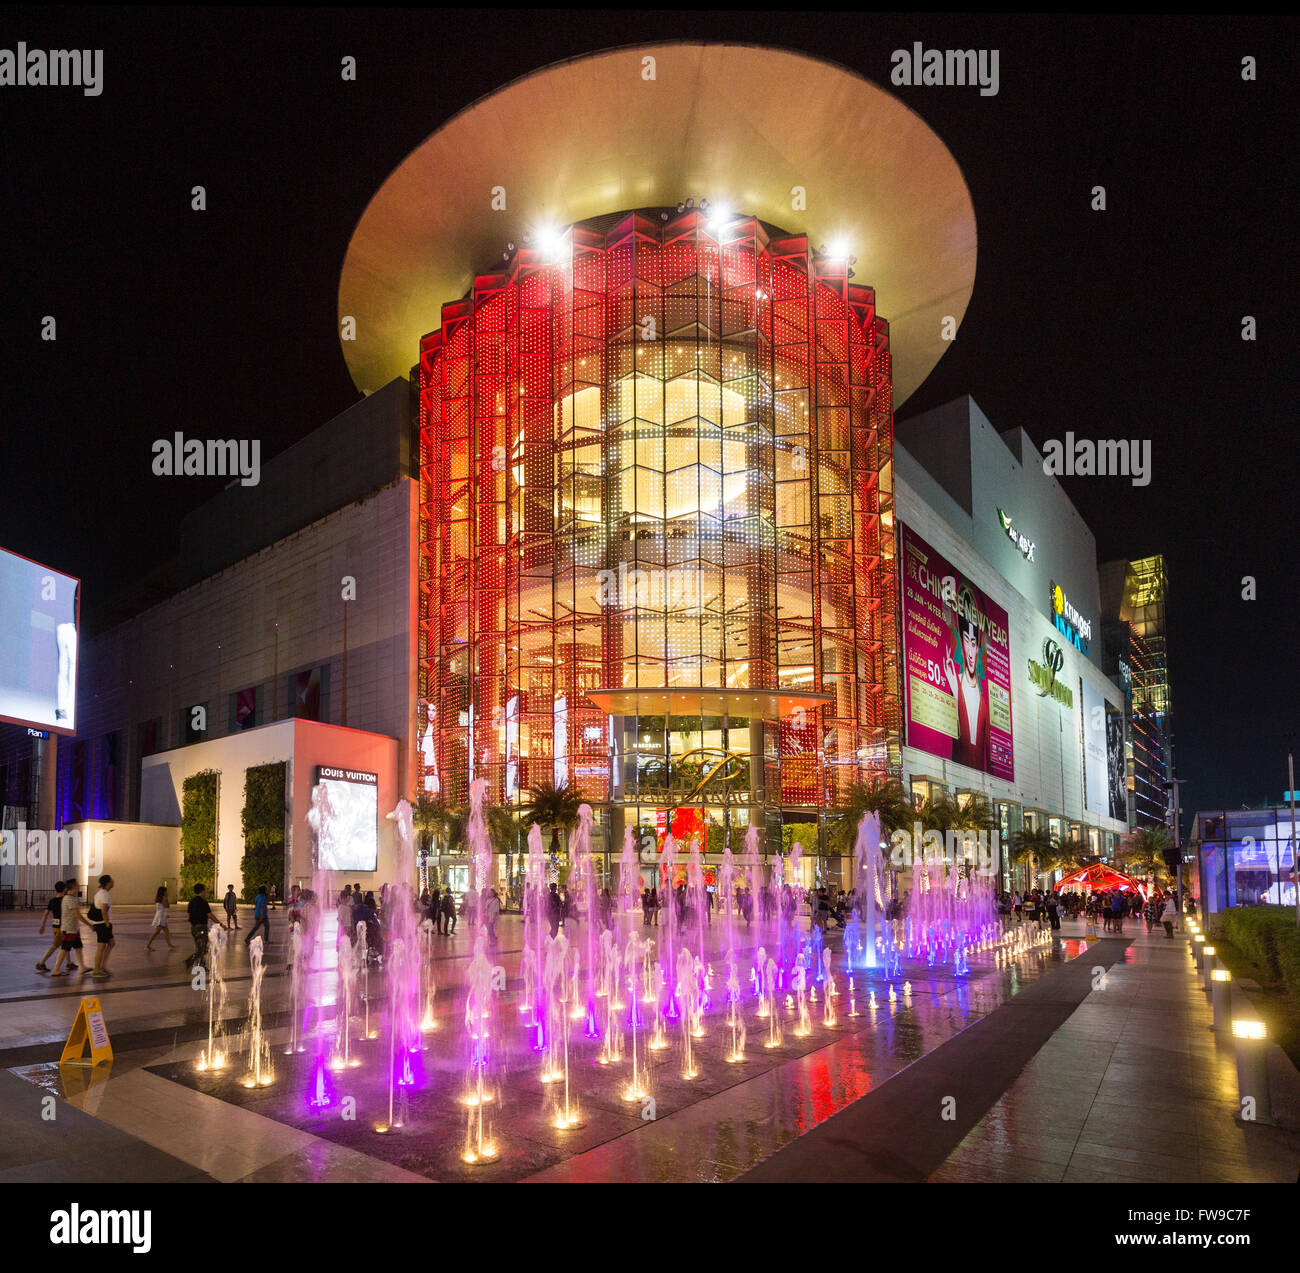 Siam Paragon shopping center at night with fountain in front of the illuminated glass facade, Rama I Road, Bangkok, Thailand Stock Photo